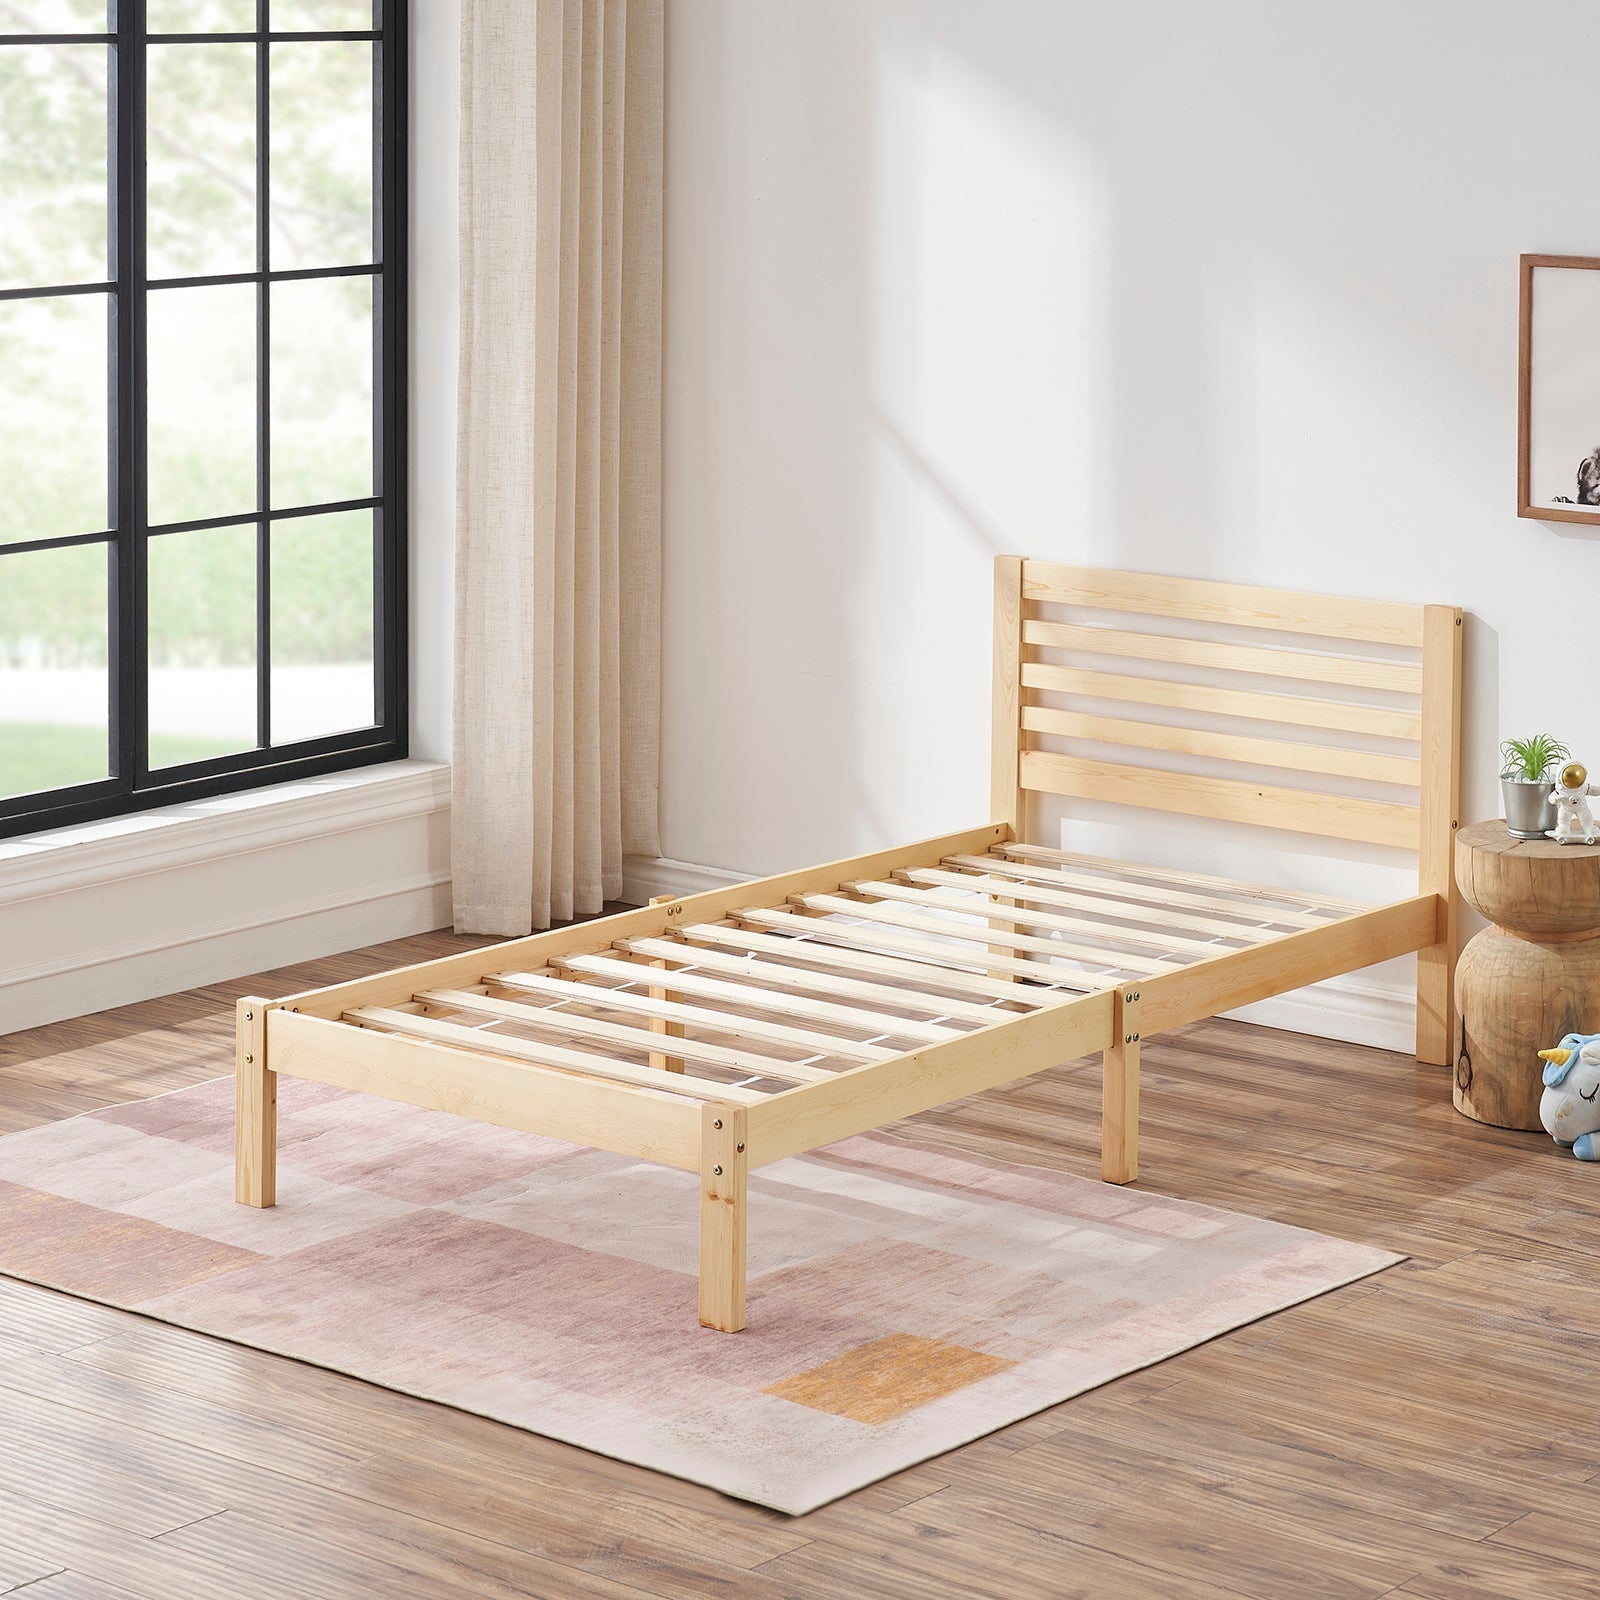 BEAN Wooden Single/Double Bed Frame 98*196cm/148*196cm - Natural Wood/White